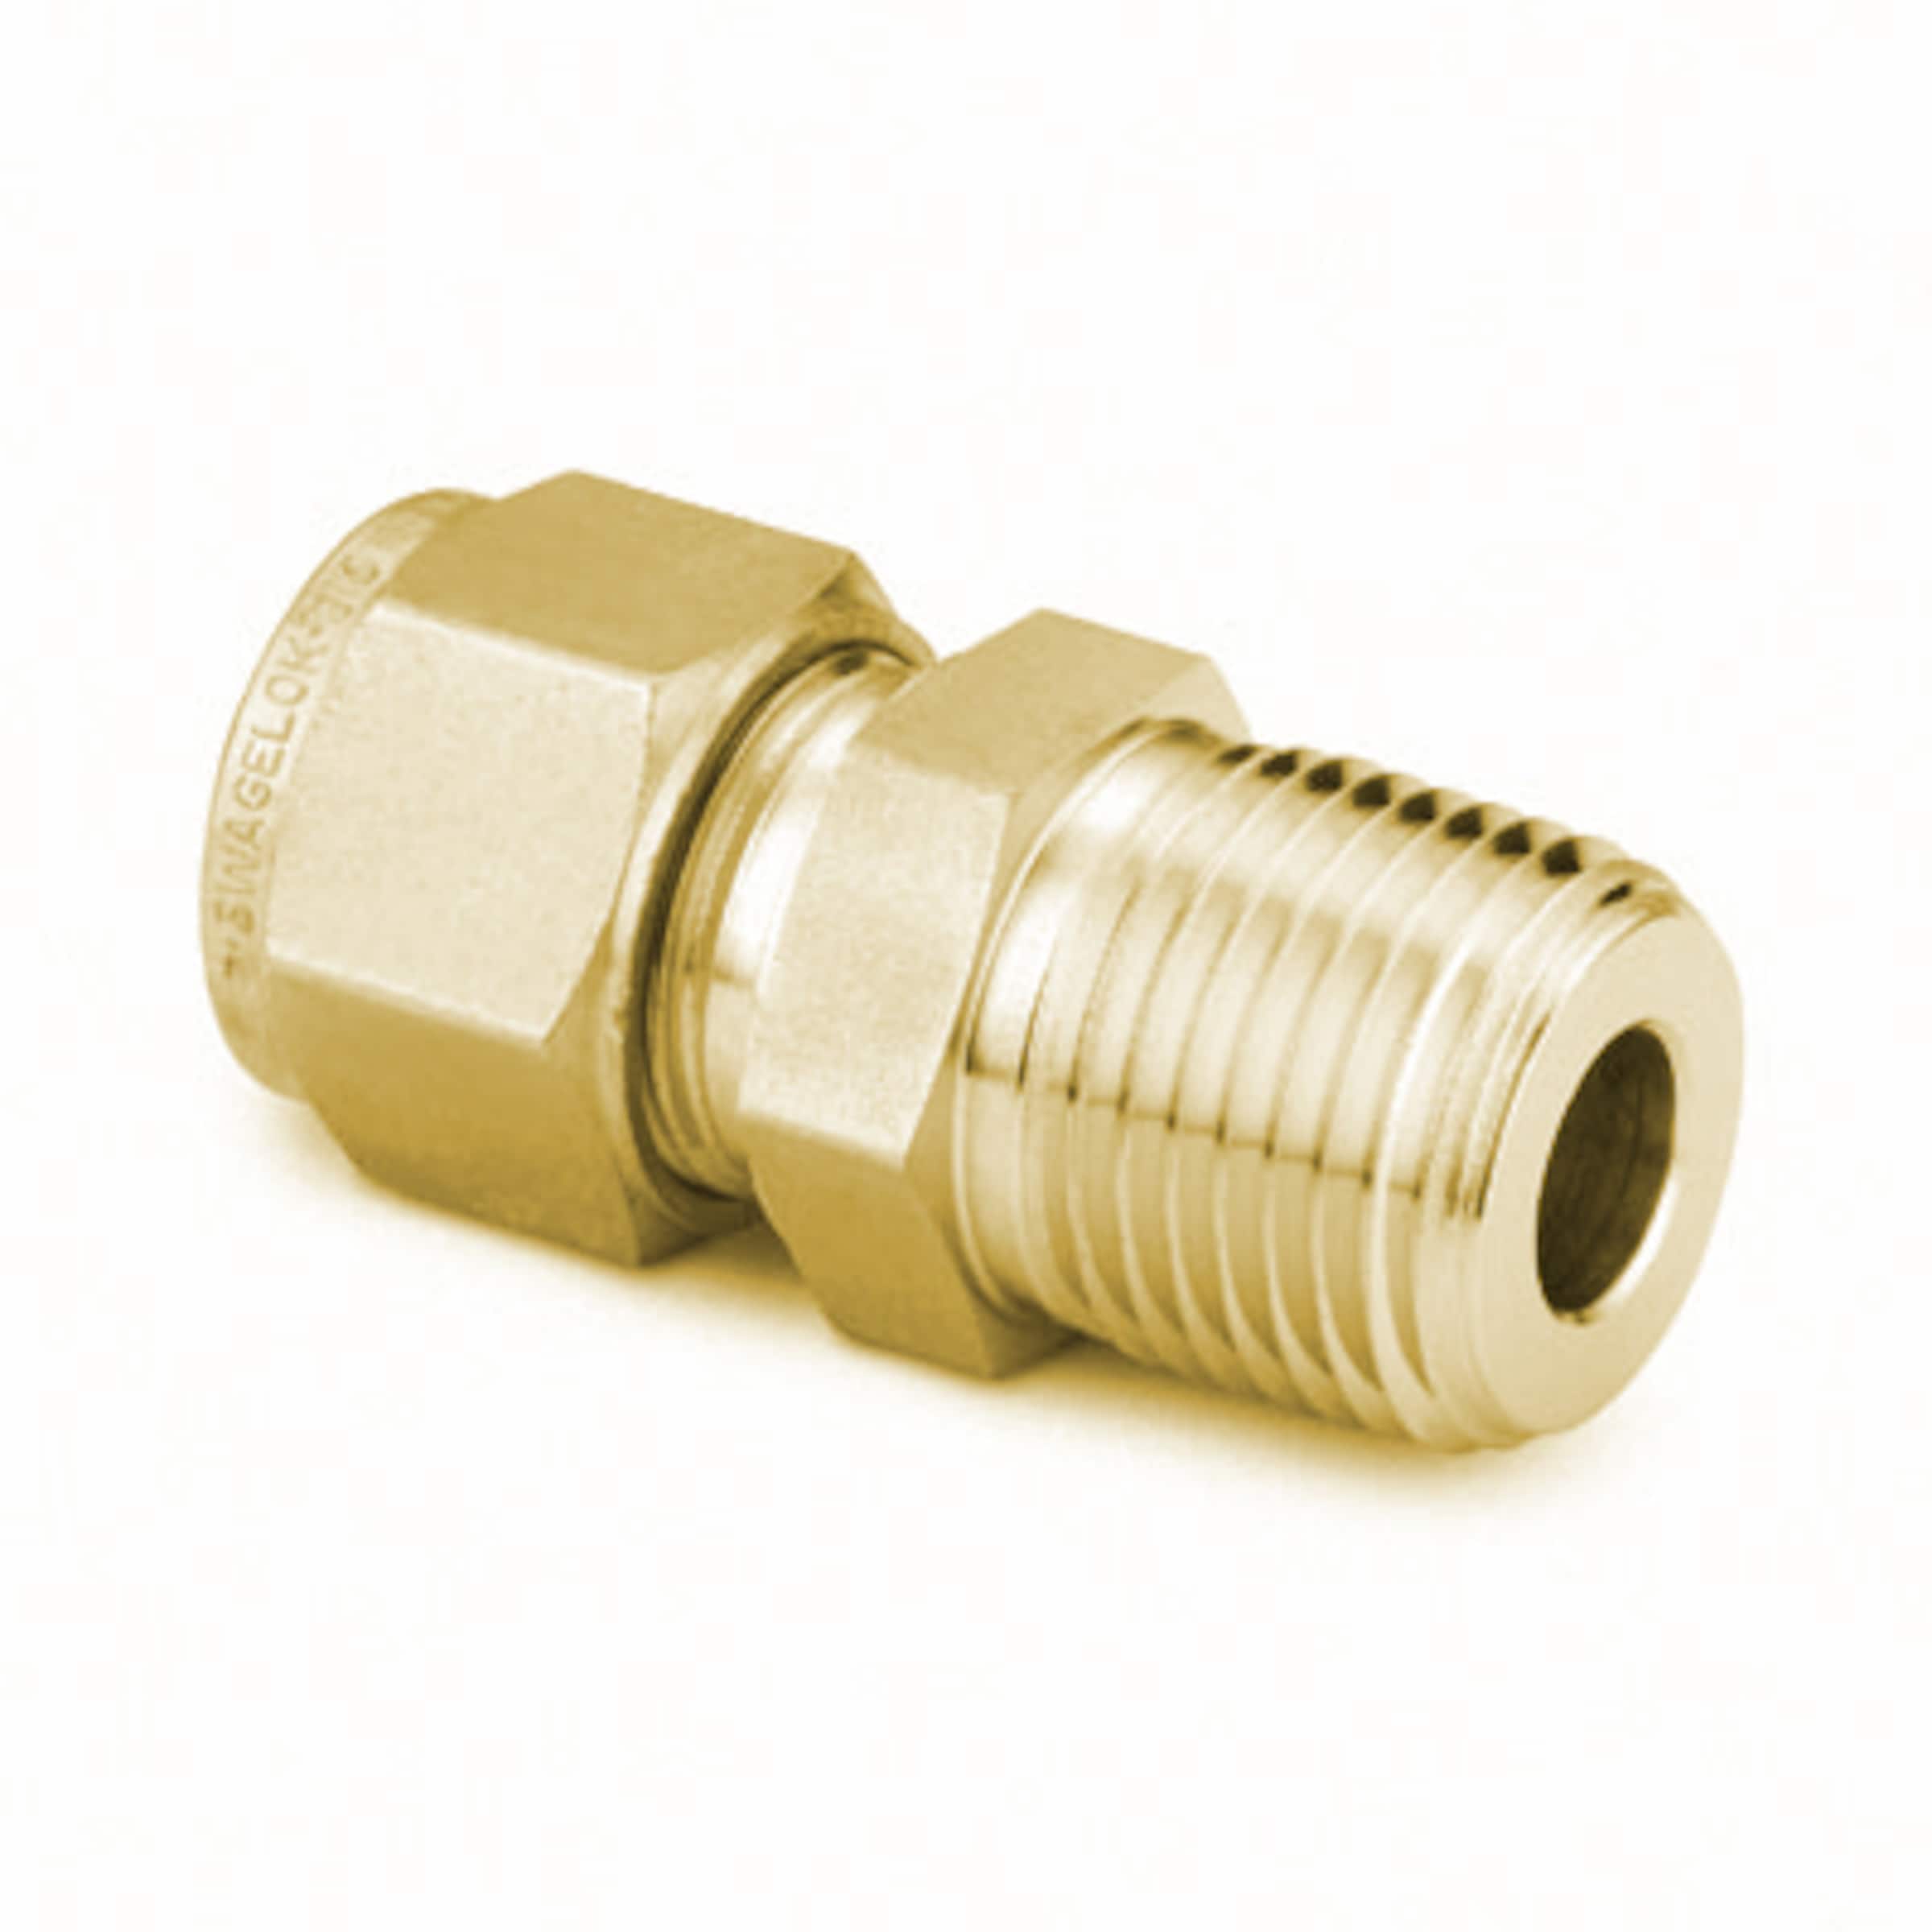 Brass Swagelok Tube Fitting, Male Connector, 10 mm Tube OD x 3/8 in ...